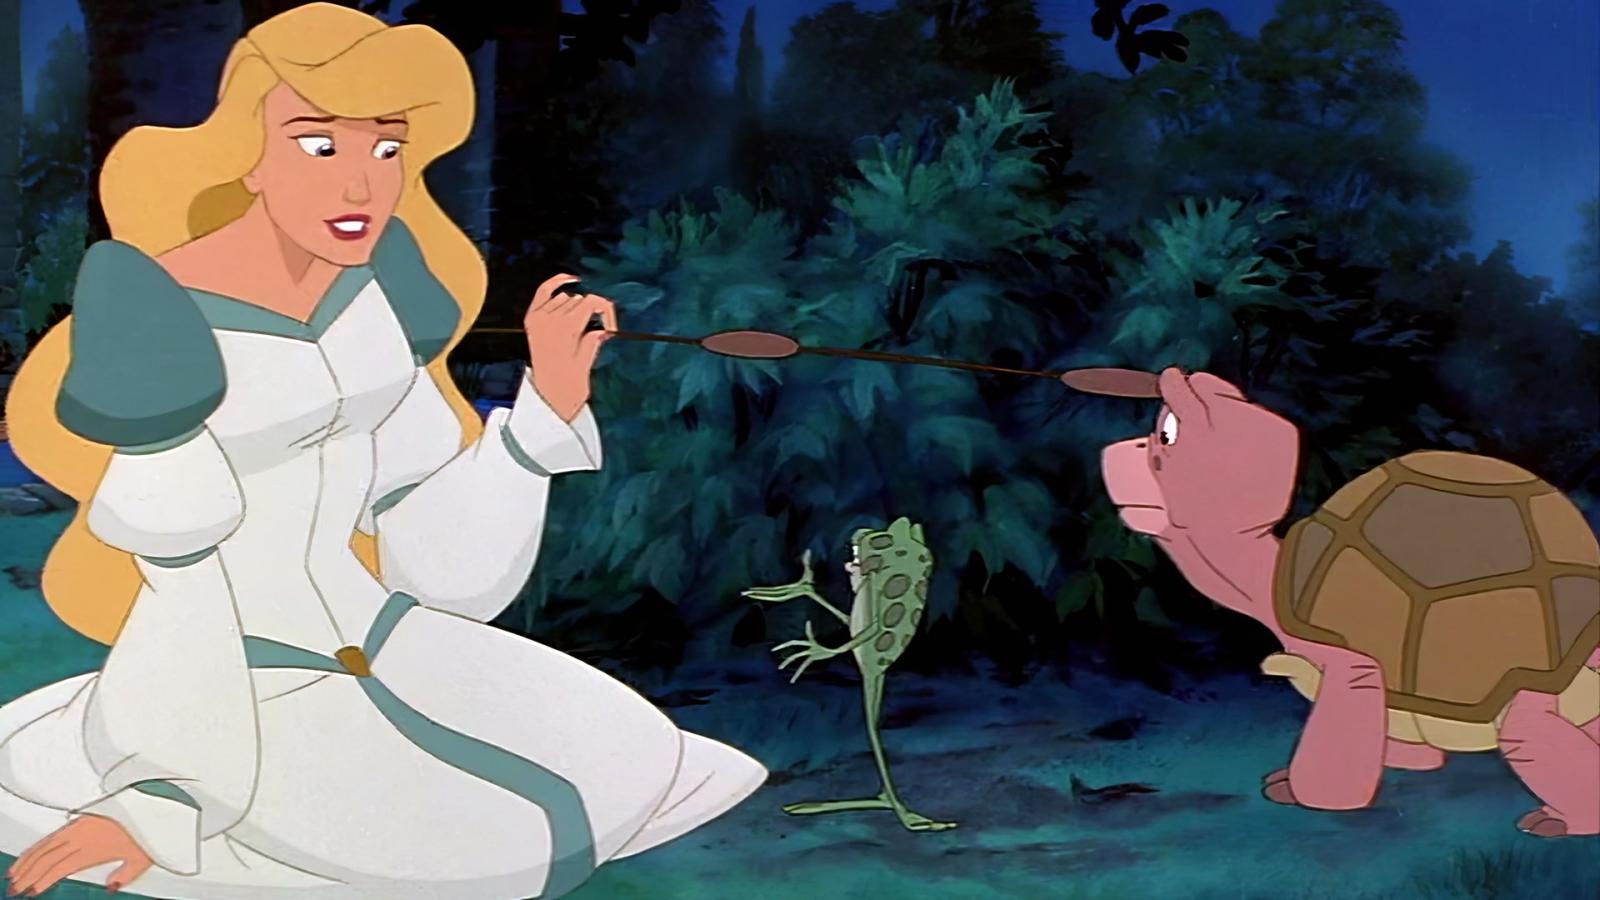 10 Underrated Animated Movies from the '90s You've Missed - image 4